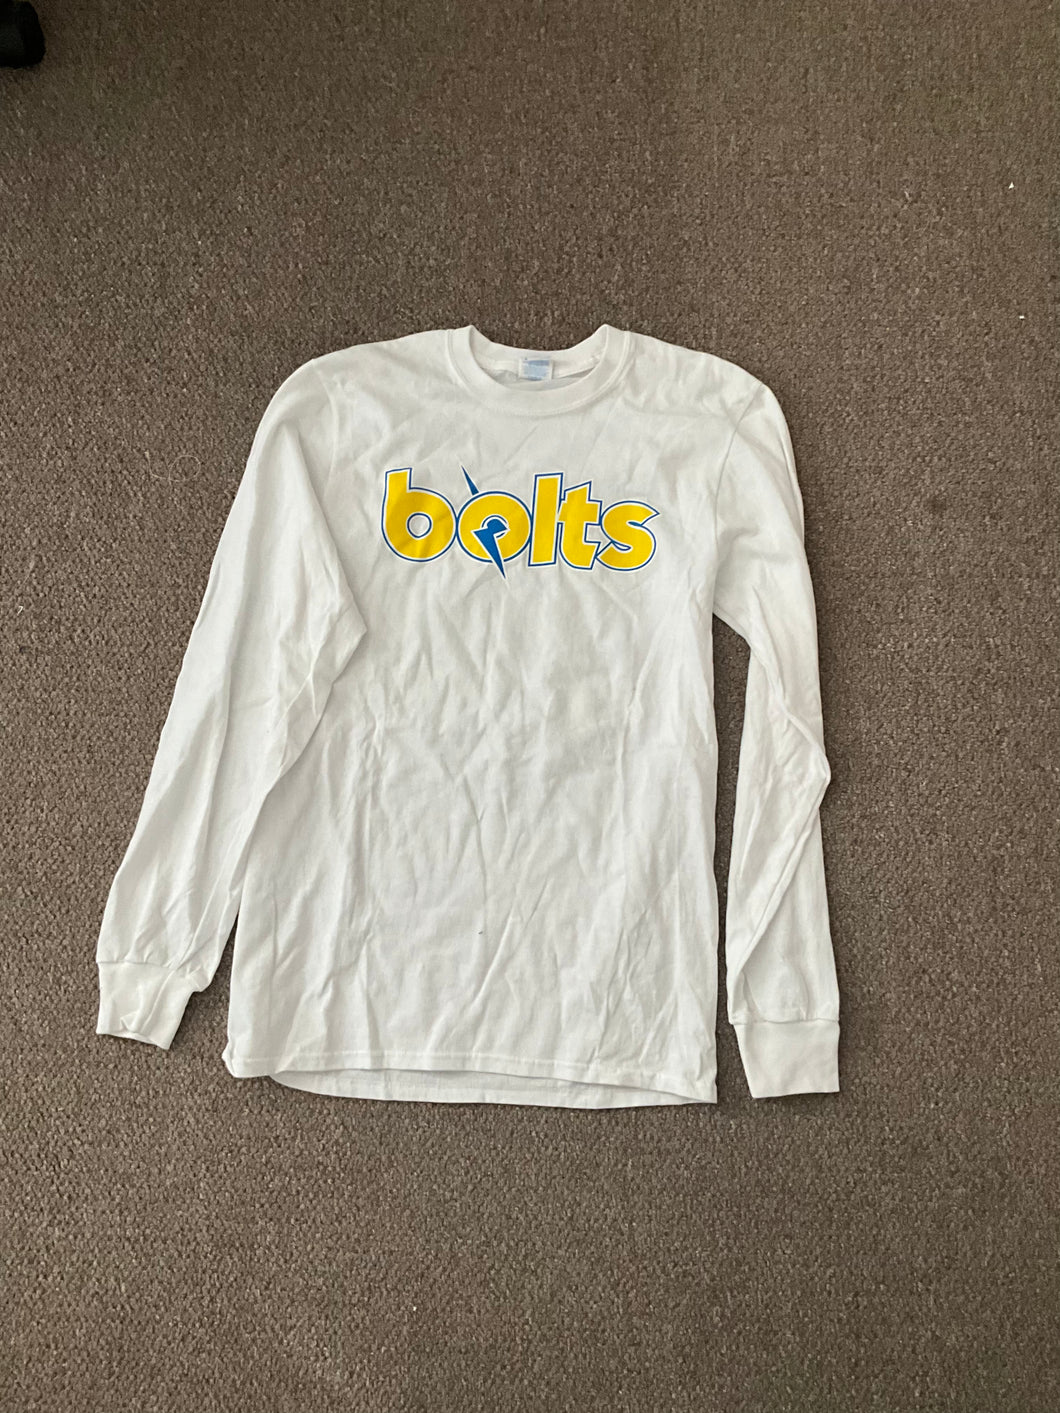 Bolts White Long Sleeve